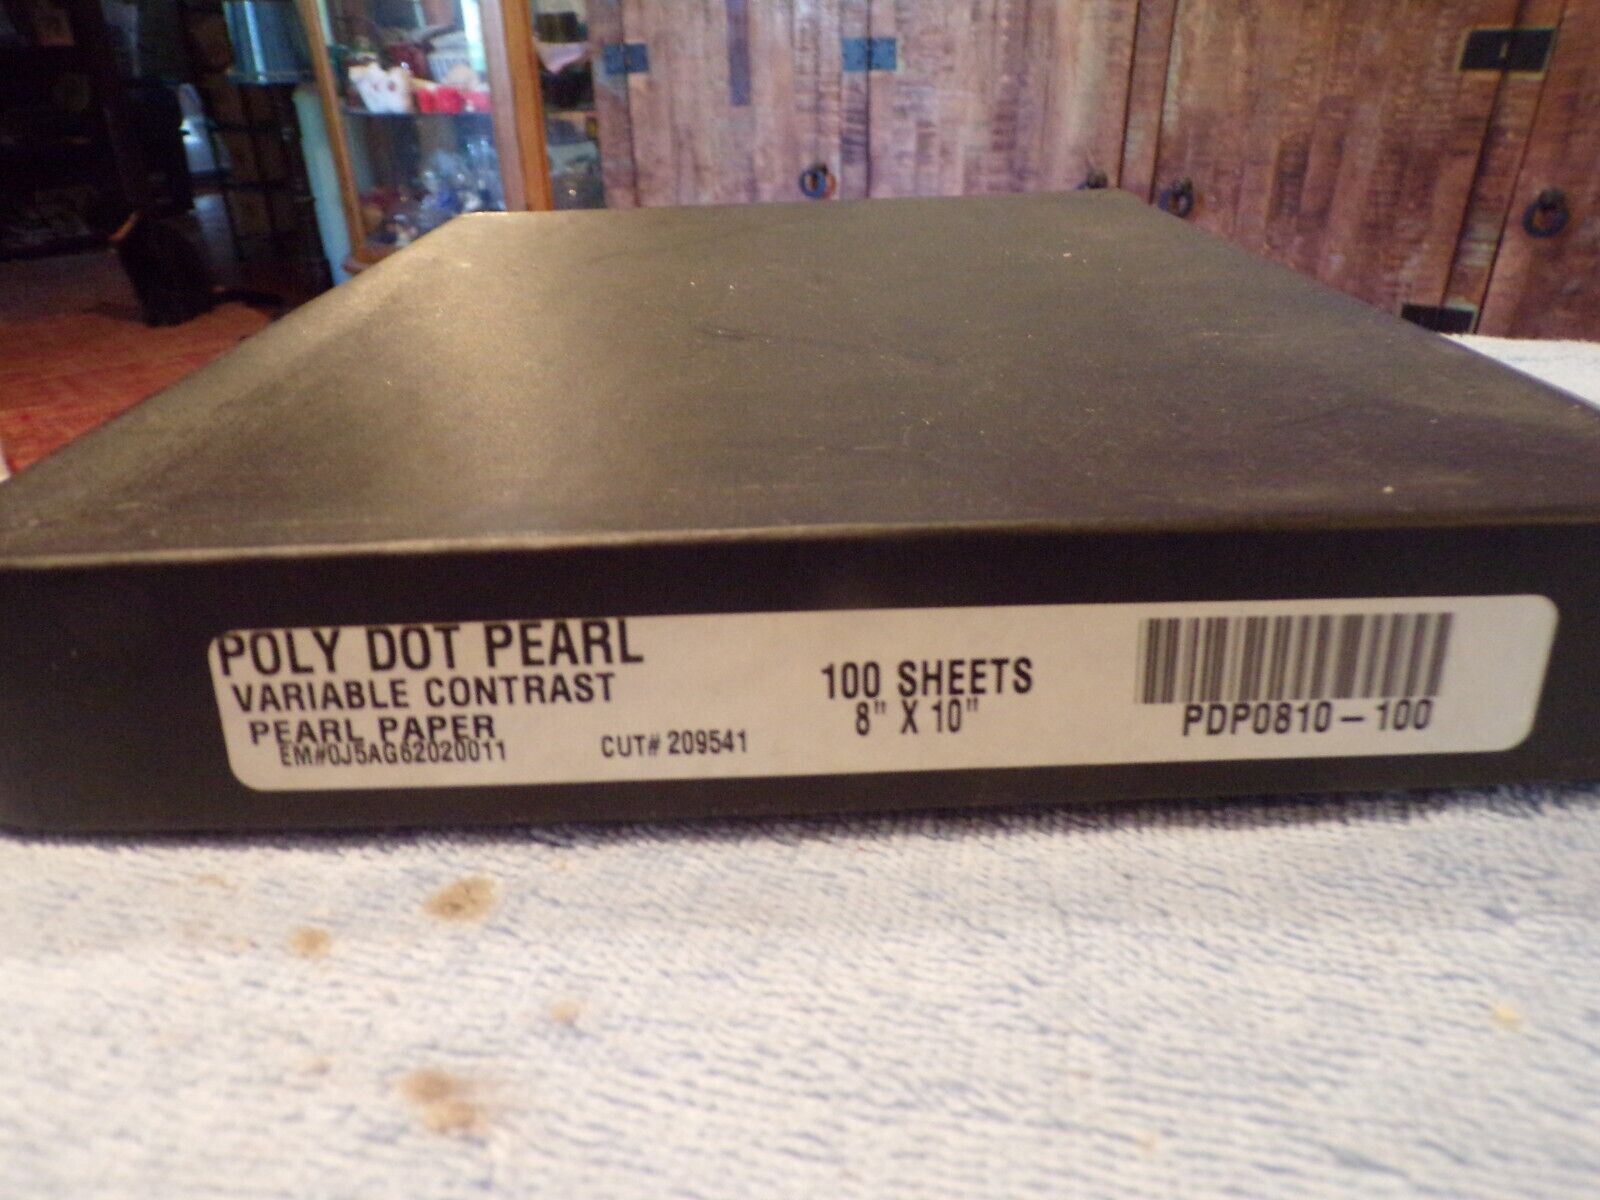 NEW Sealed Box POLY DOT PEARL VARIABLE CONTRAST PAPER 8 X 10 100ct PDP0810-100